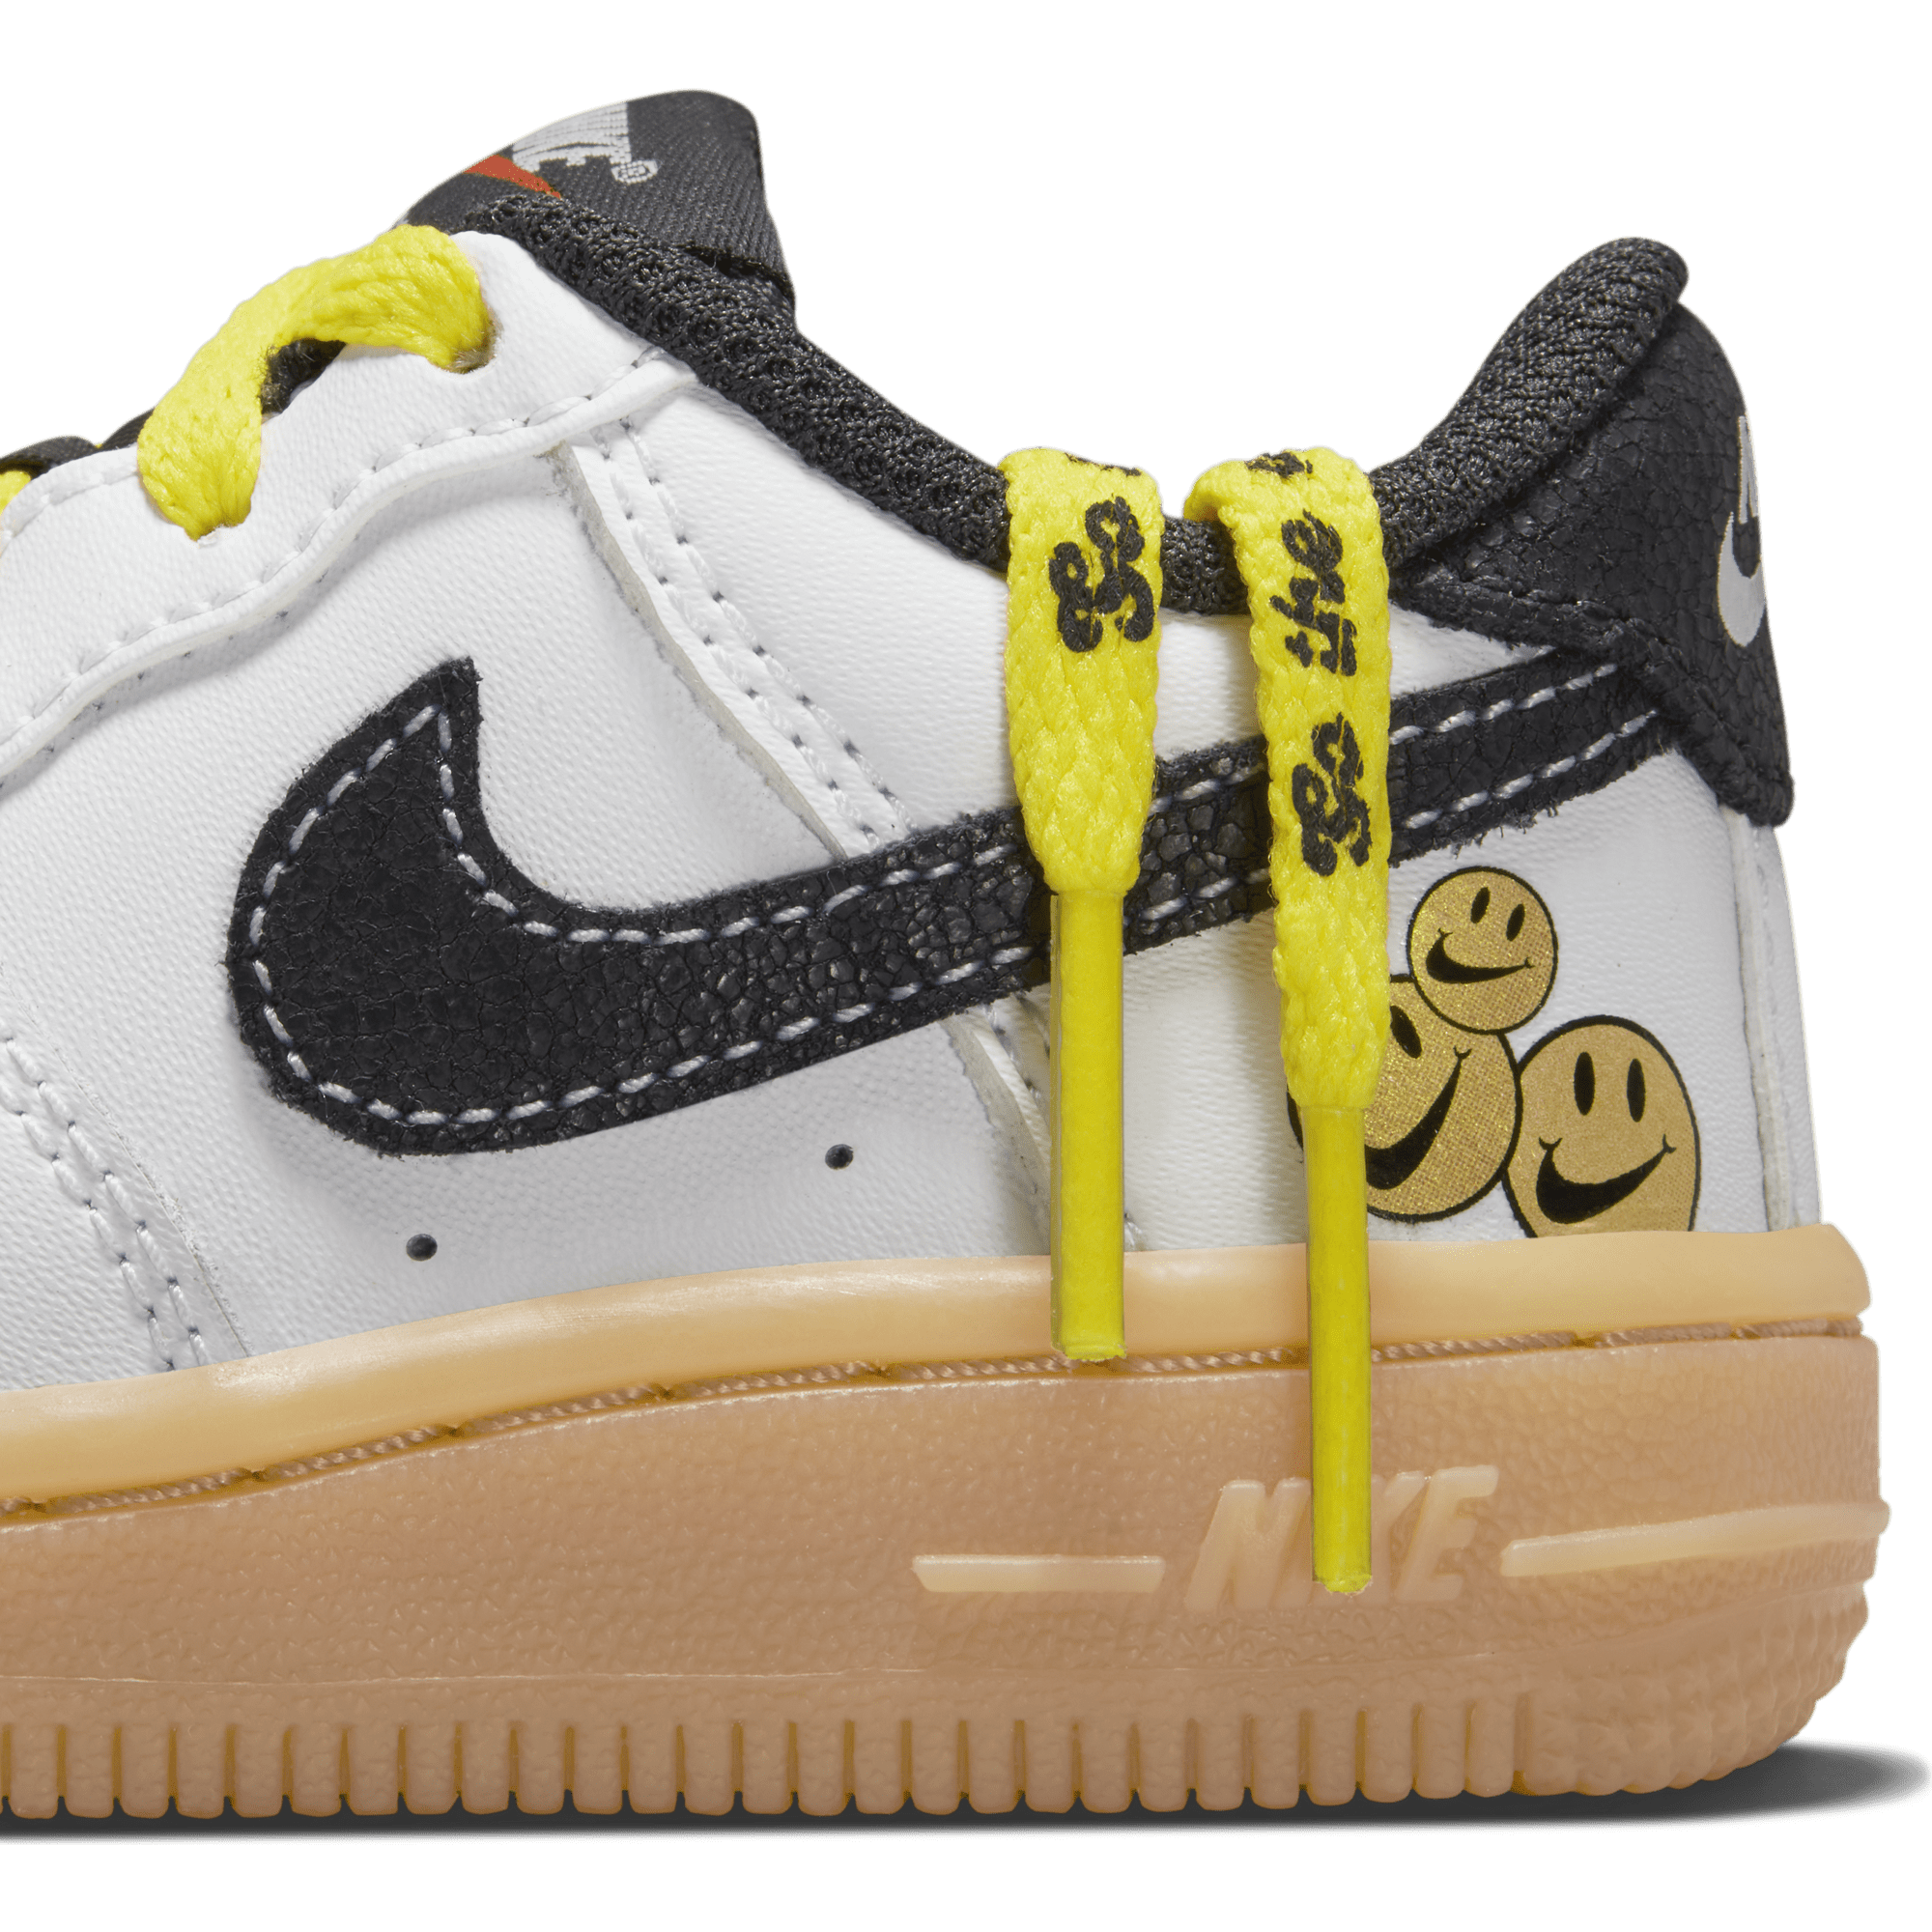 Nike Force 1 LV8 Baby/Toddler Shoes.